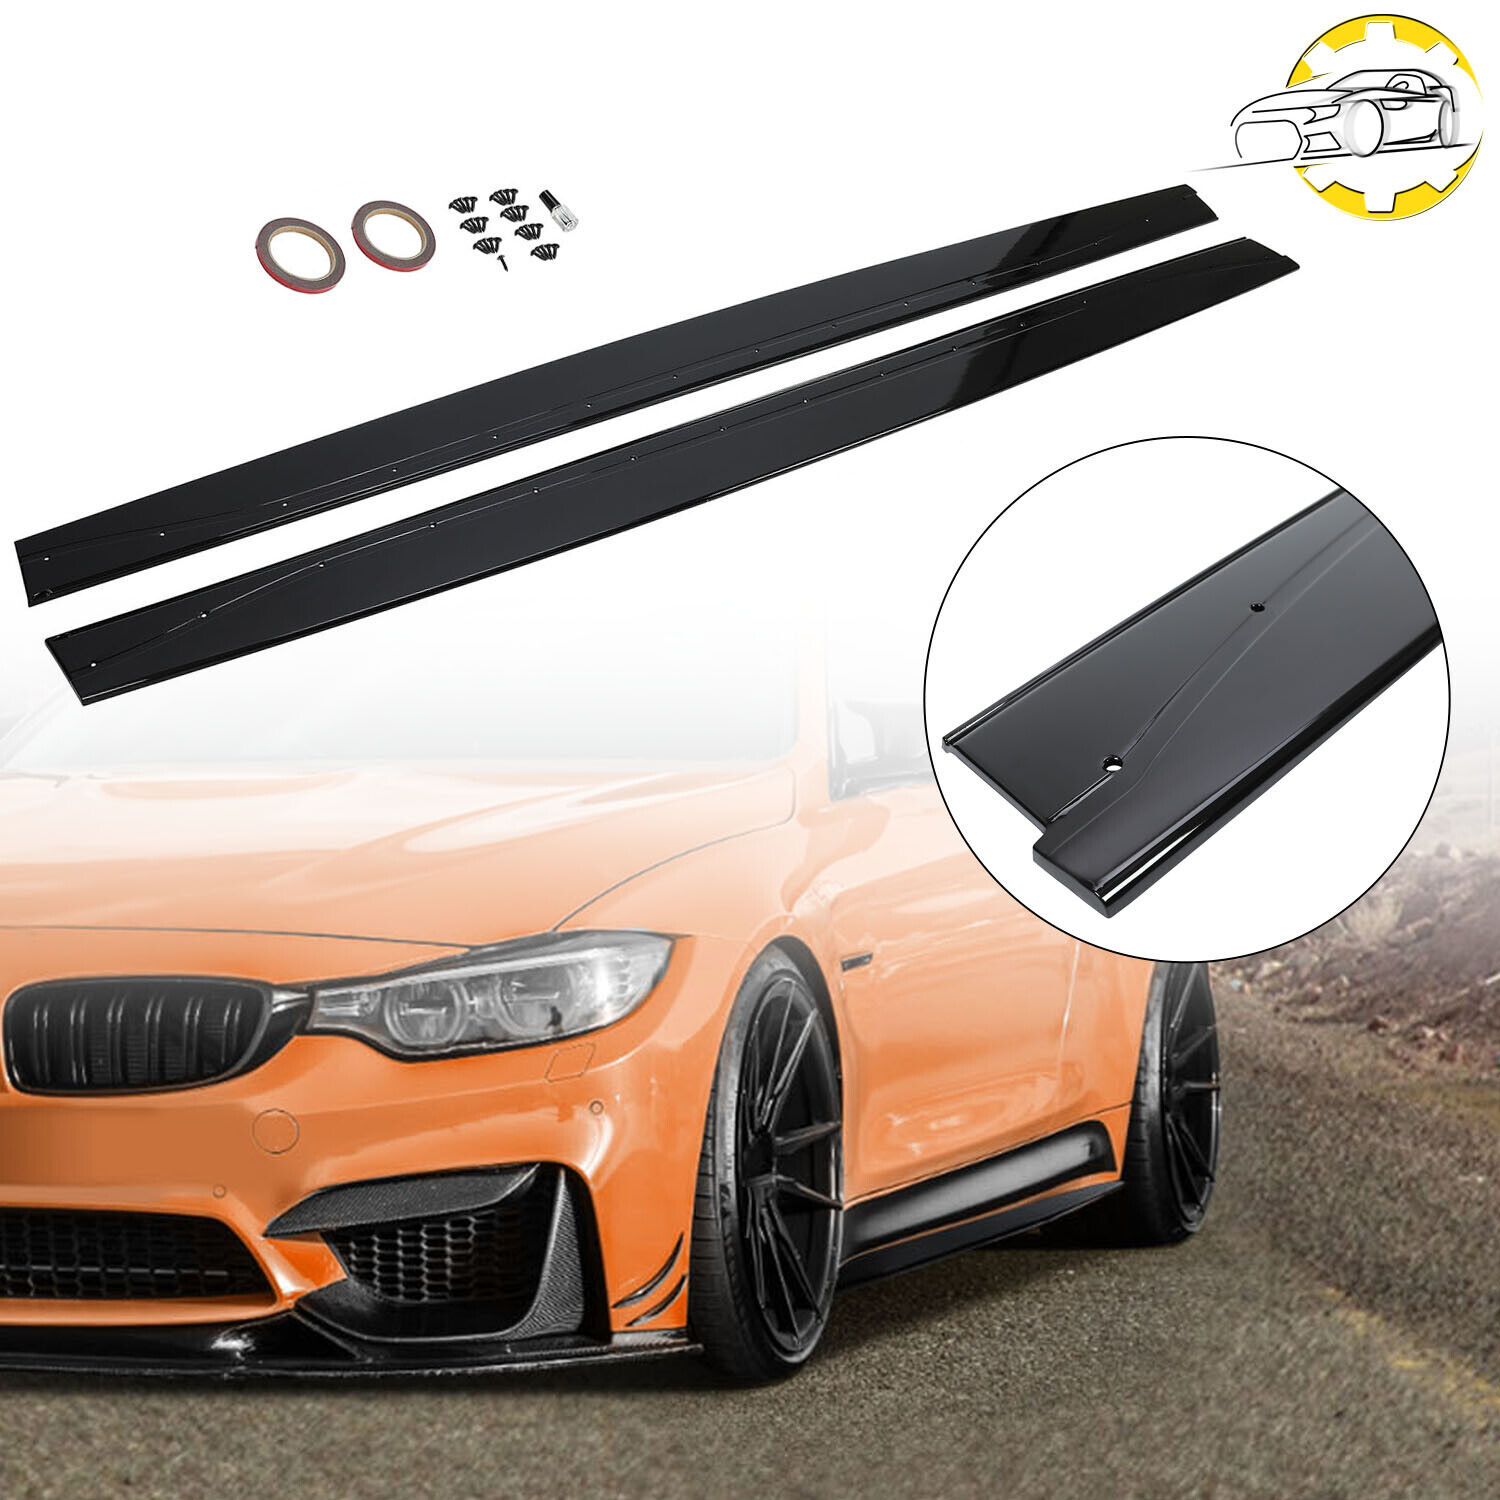 MP Style Side Skirts Extension Lip For BMW F82 F83 M4 2015-2020 Black Painted